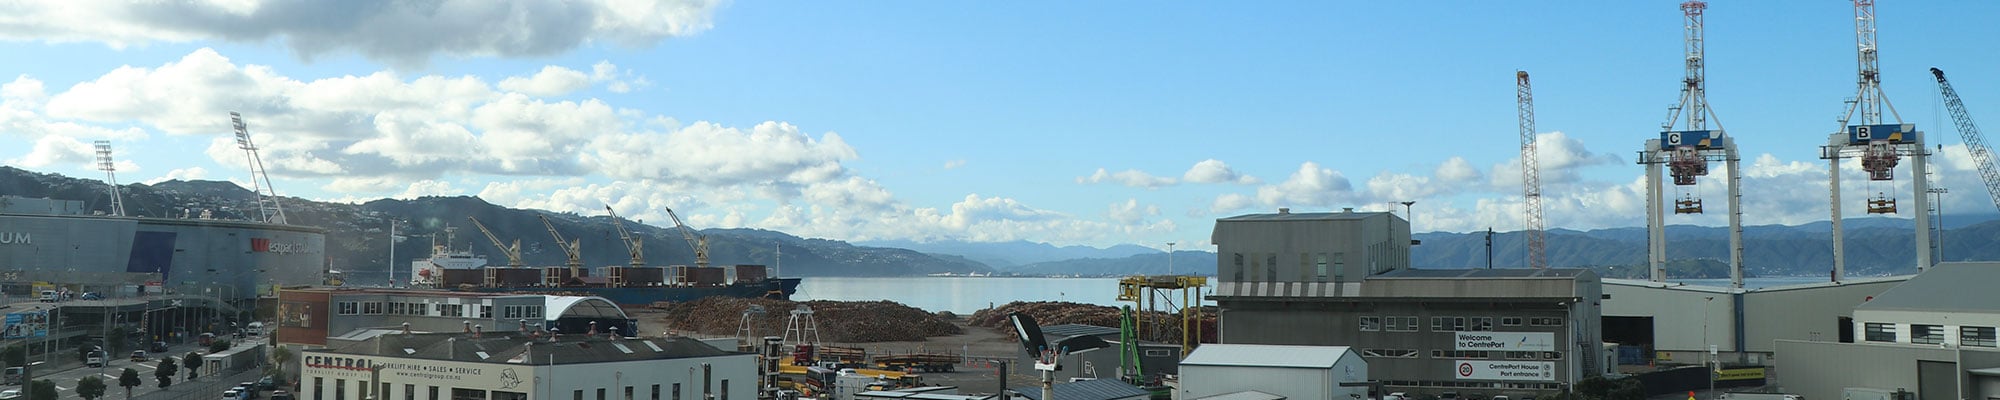 Wellington Port with logs for export